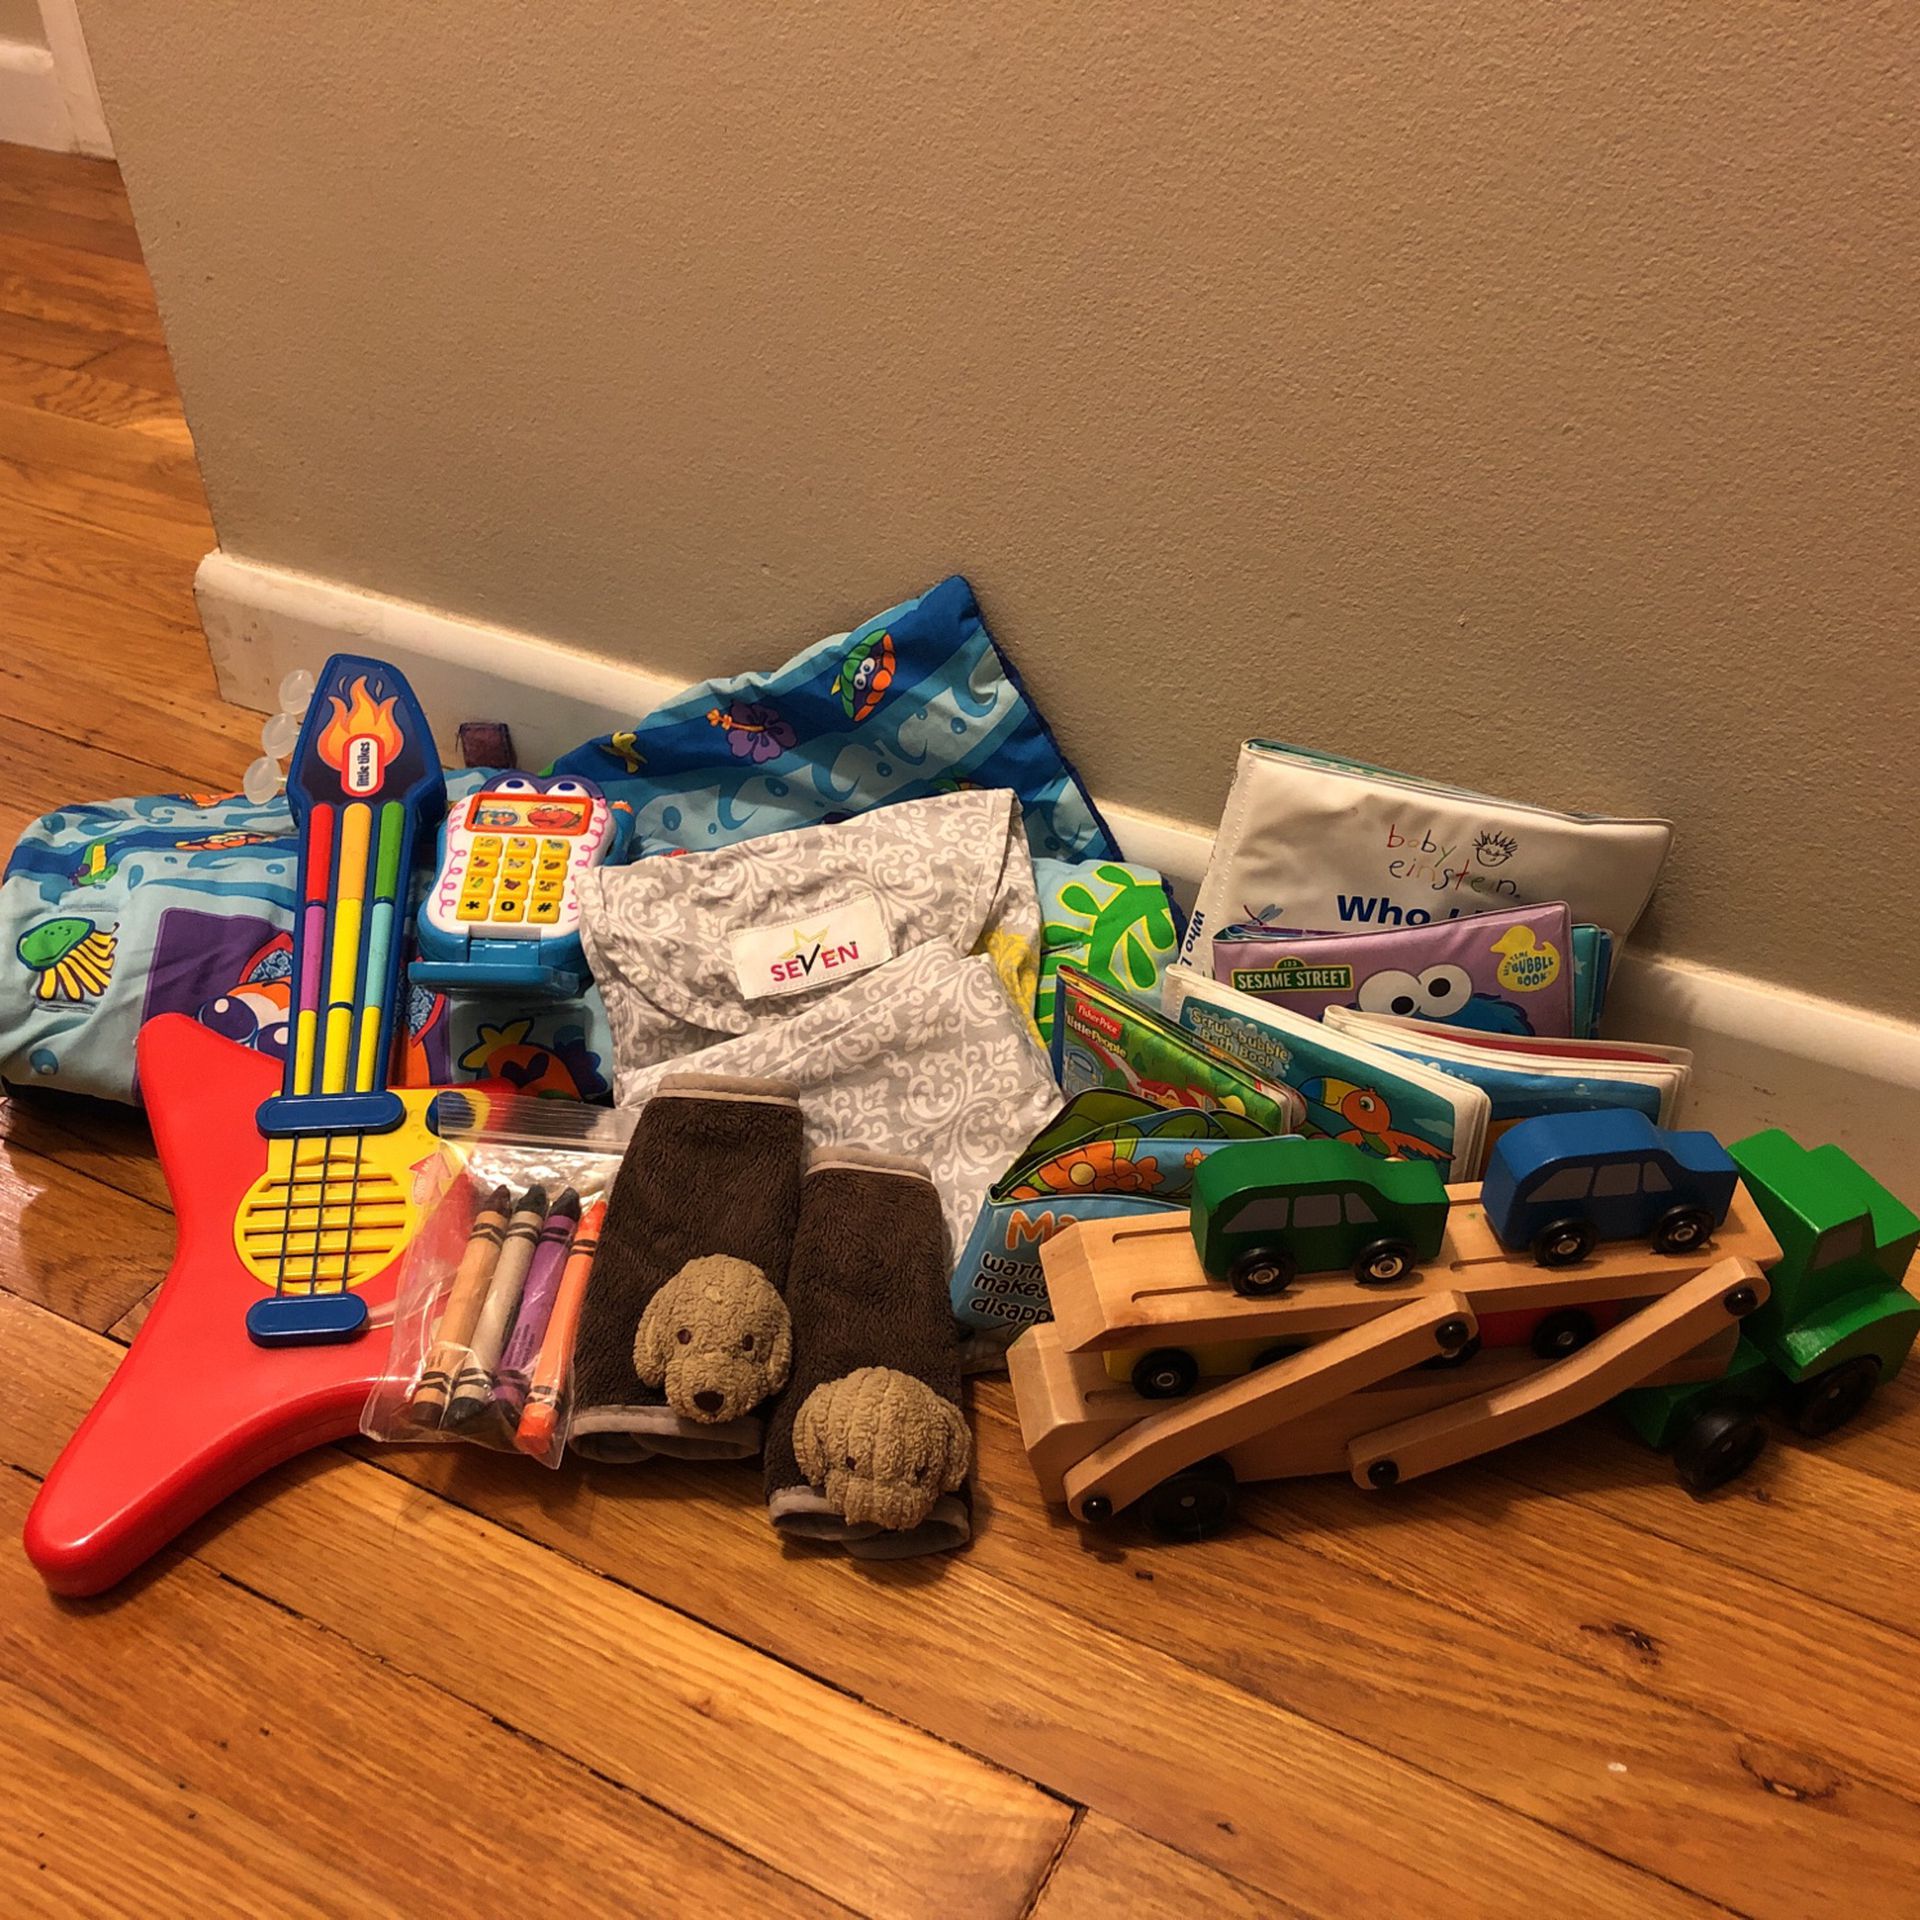 Baby Items: Books, Cars, Cart Cover, Sling Carrier, Strap Covers, Music